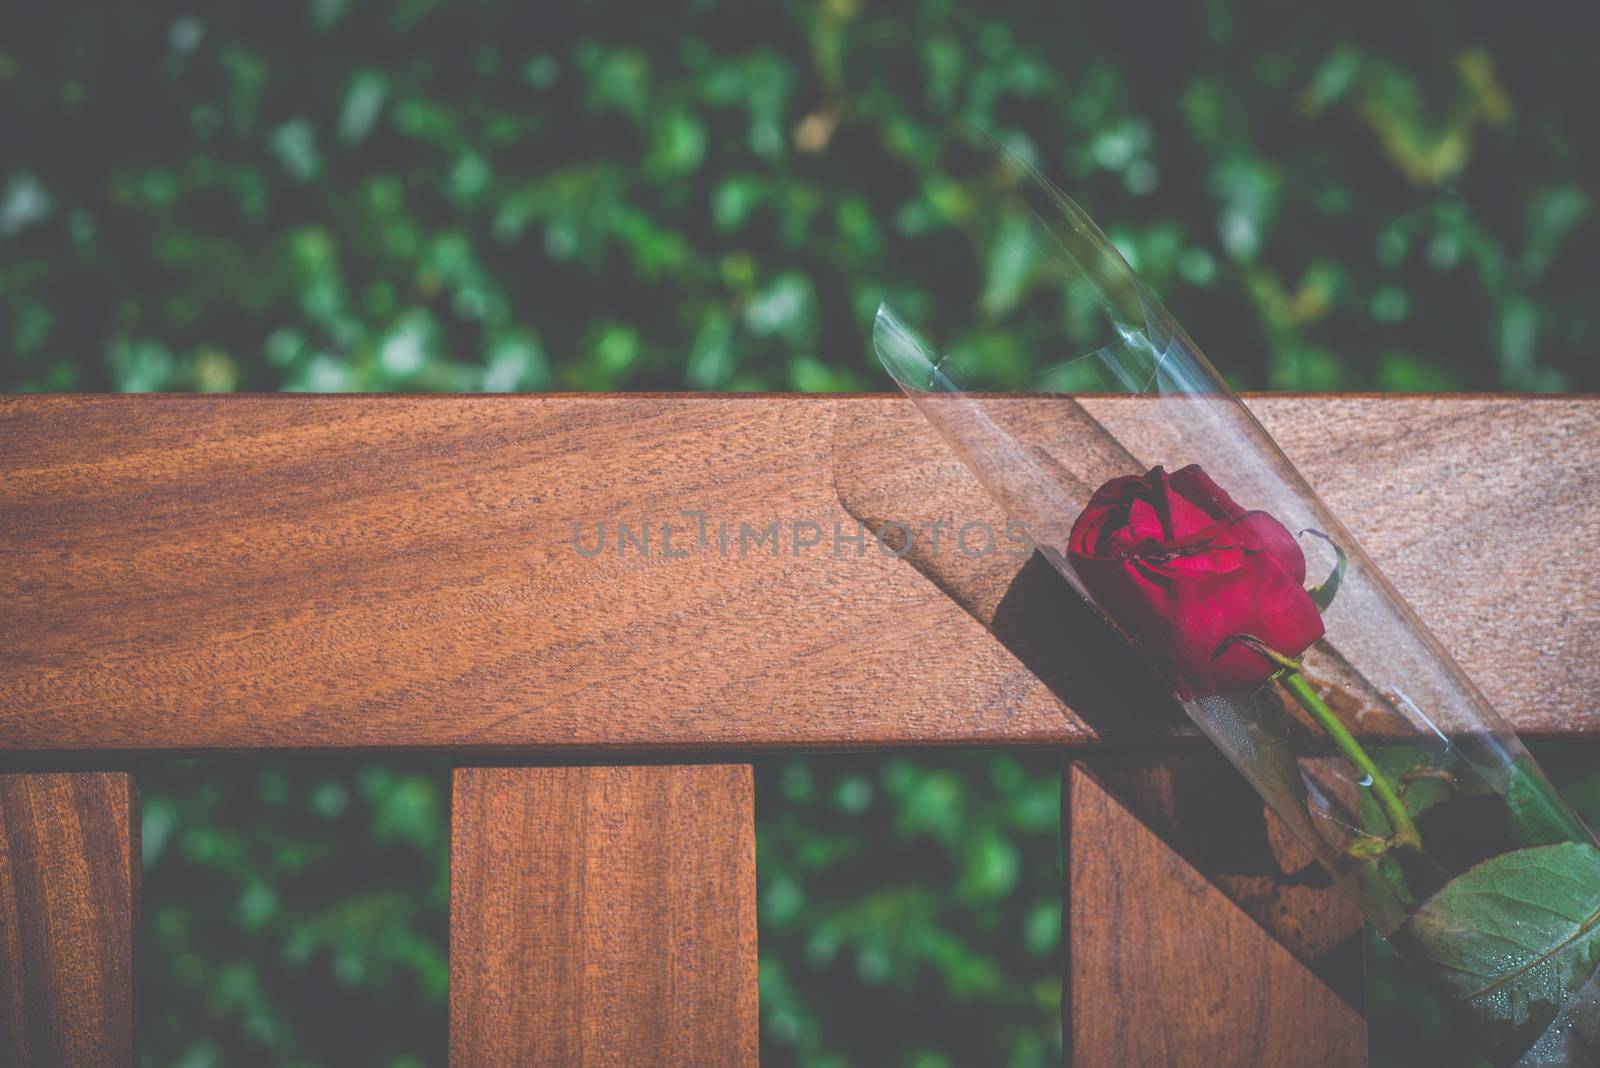 A Single Rose On A Memorial Bench In A Cemetery With Copy Space